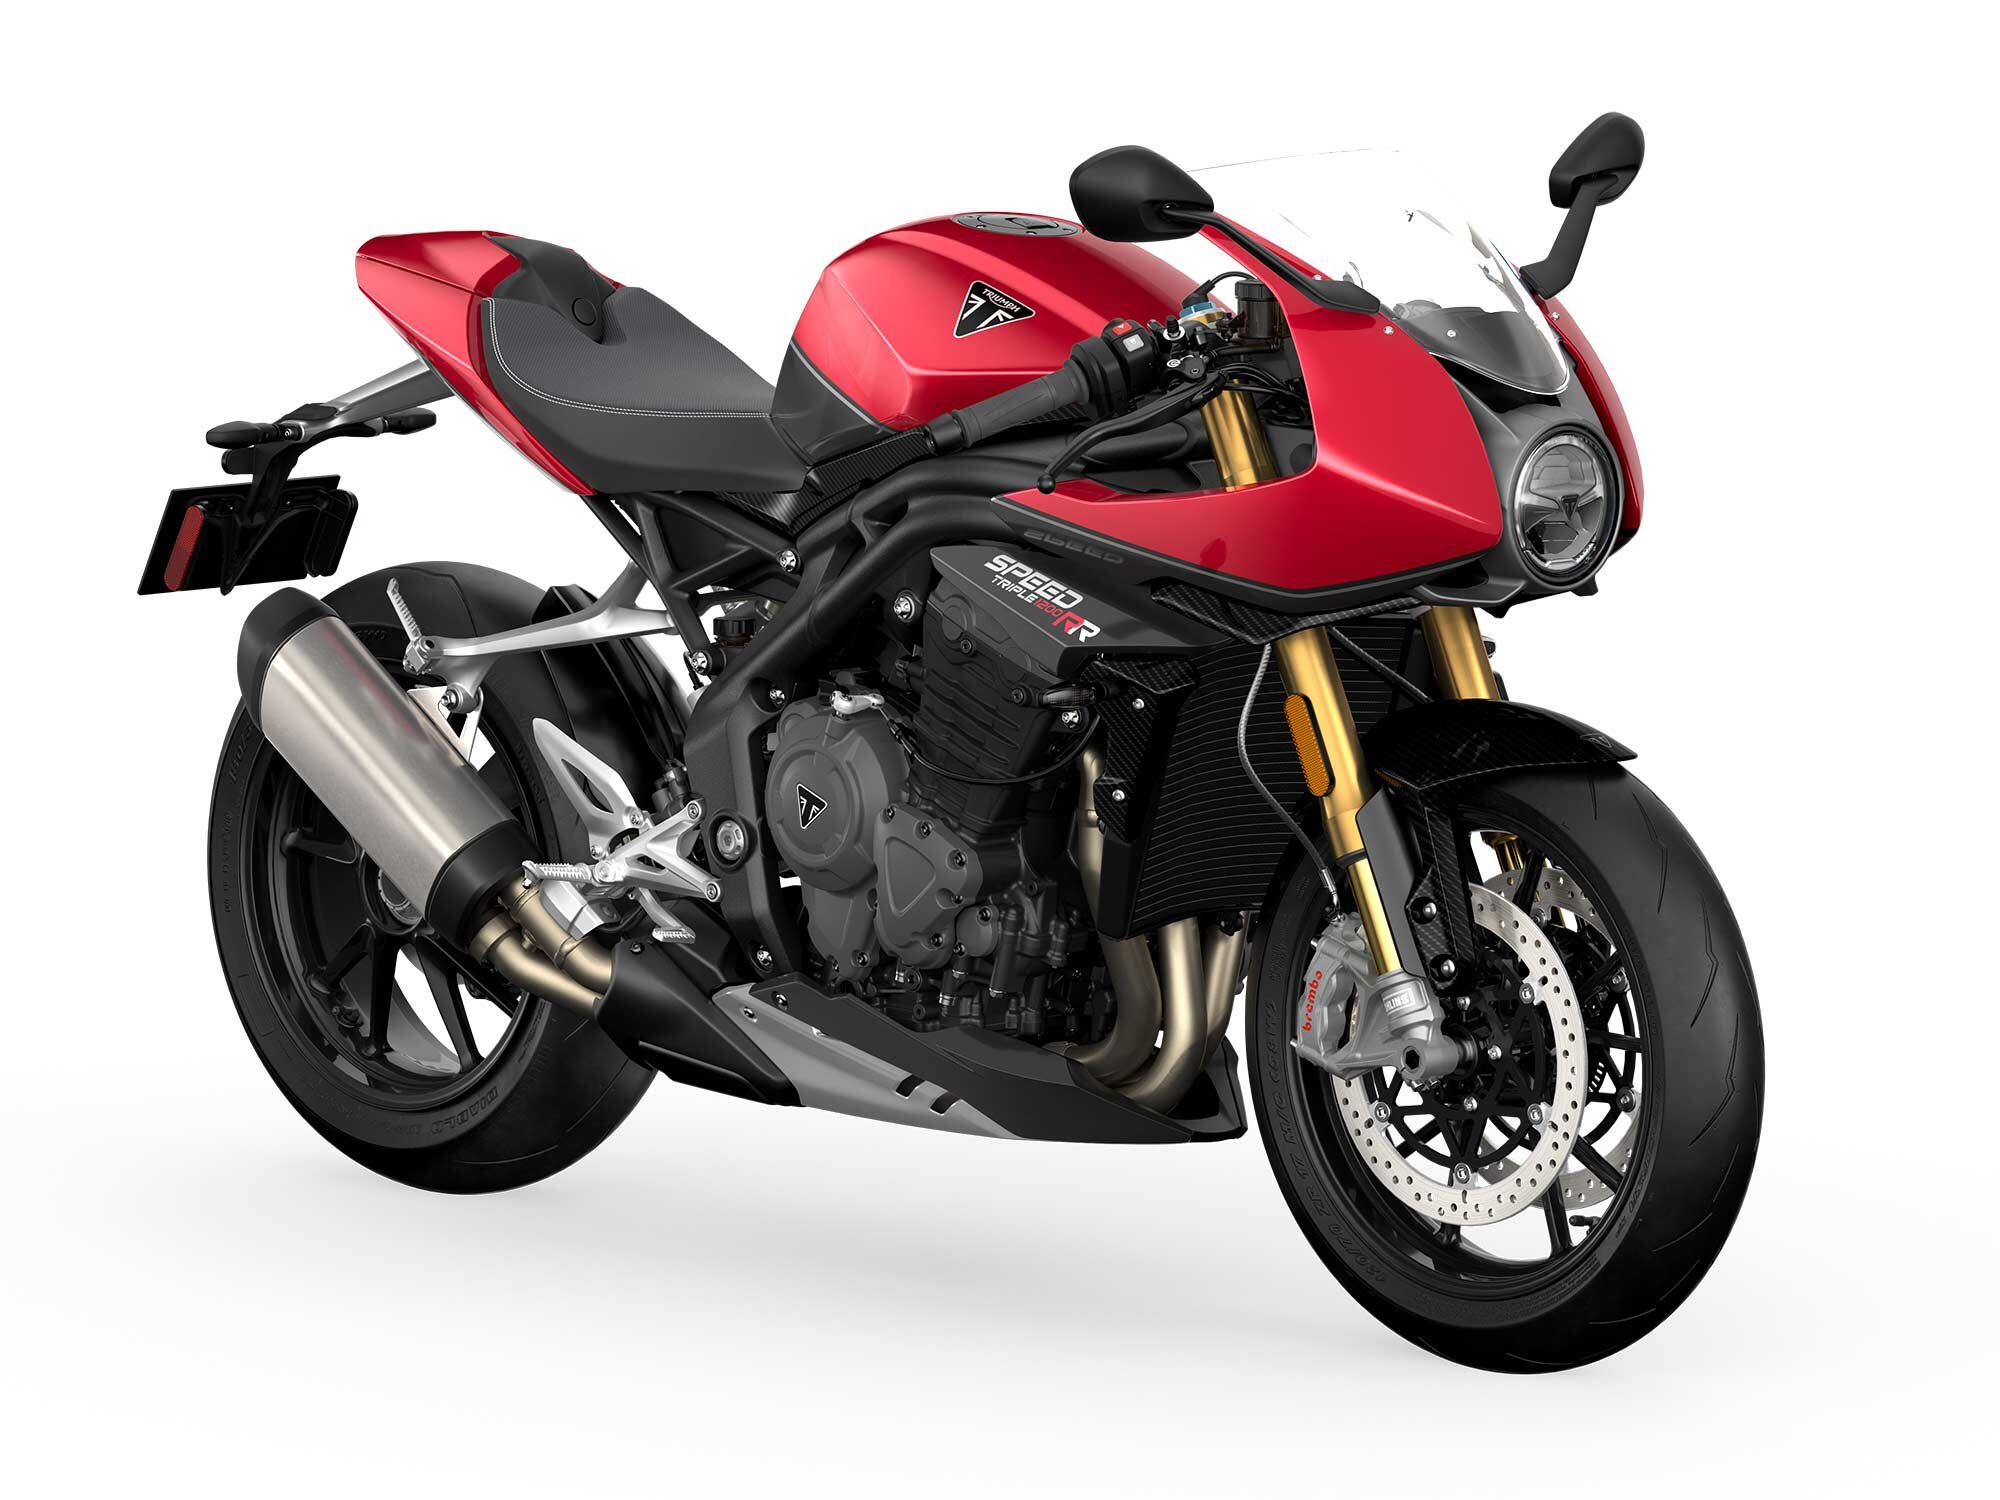 The Triumph Speed Triple has always been known for its street-fighting prowess, but throw on a fairing and the 1200 RR transforms into one hell of a well-rounded, street-focused sportbike.